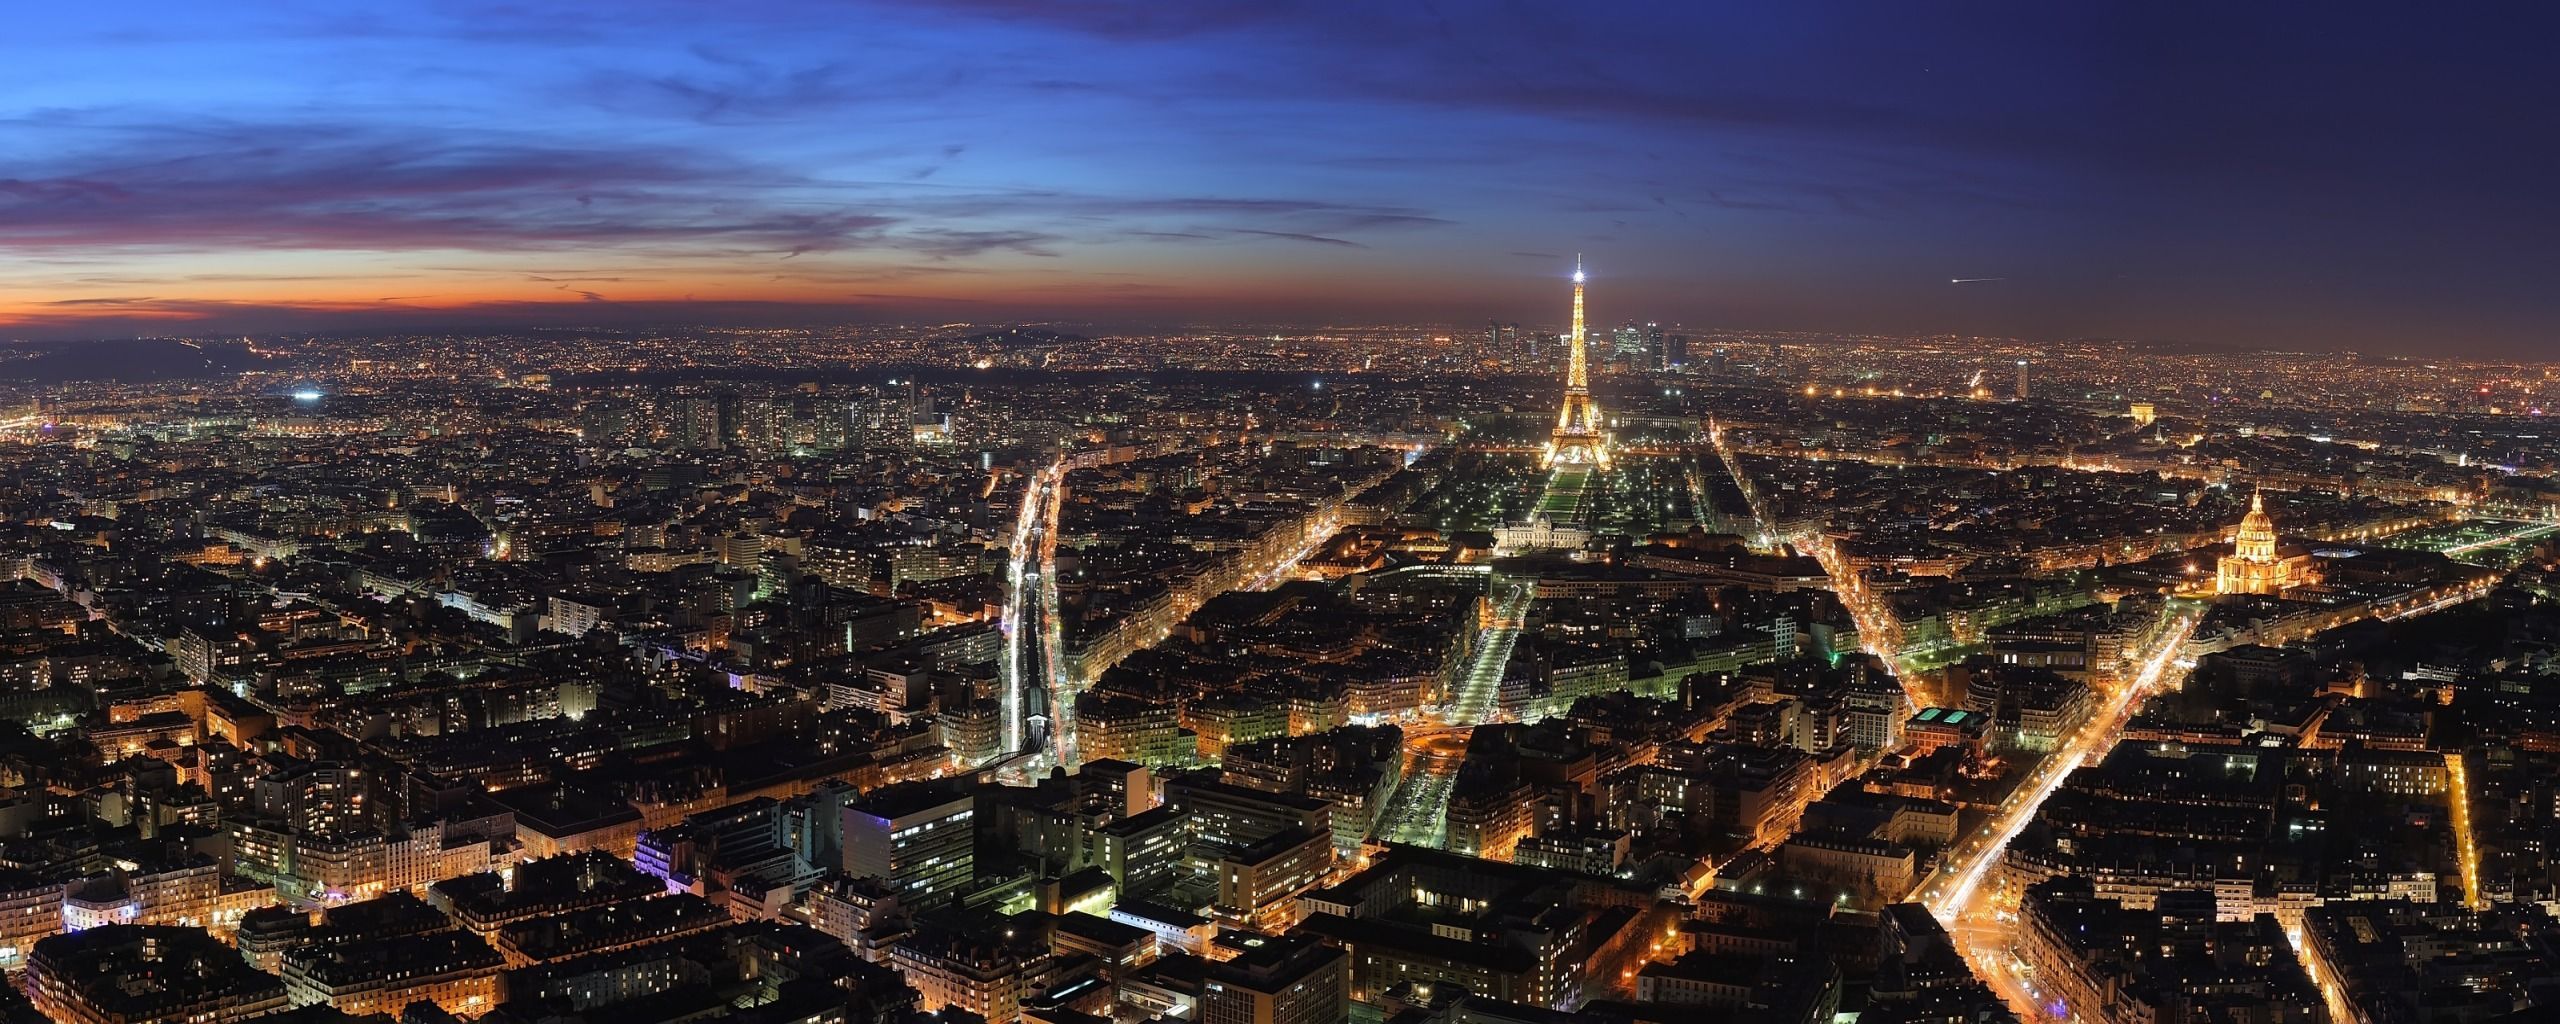 Paris at Night Dual Monitor Wallpapers HD Backgrounds